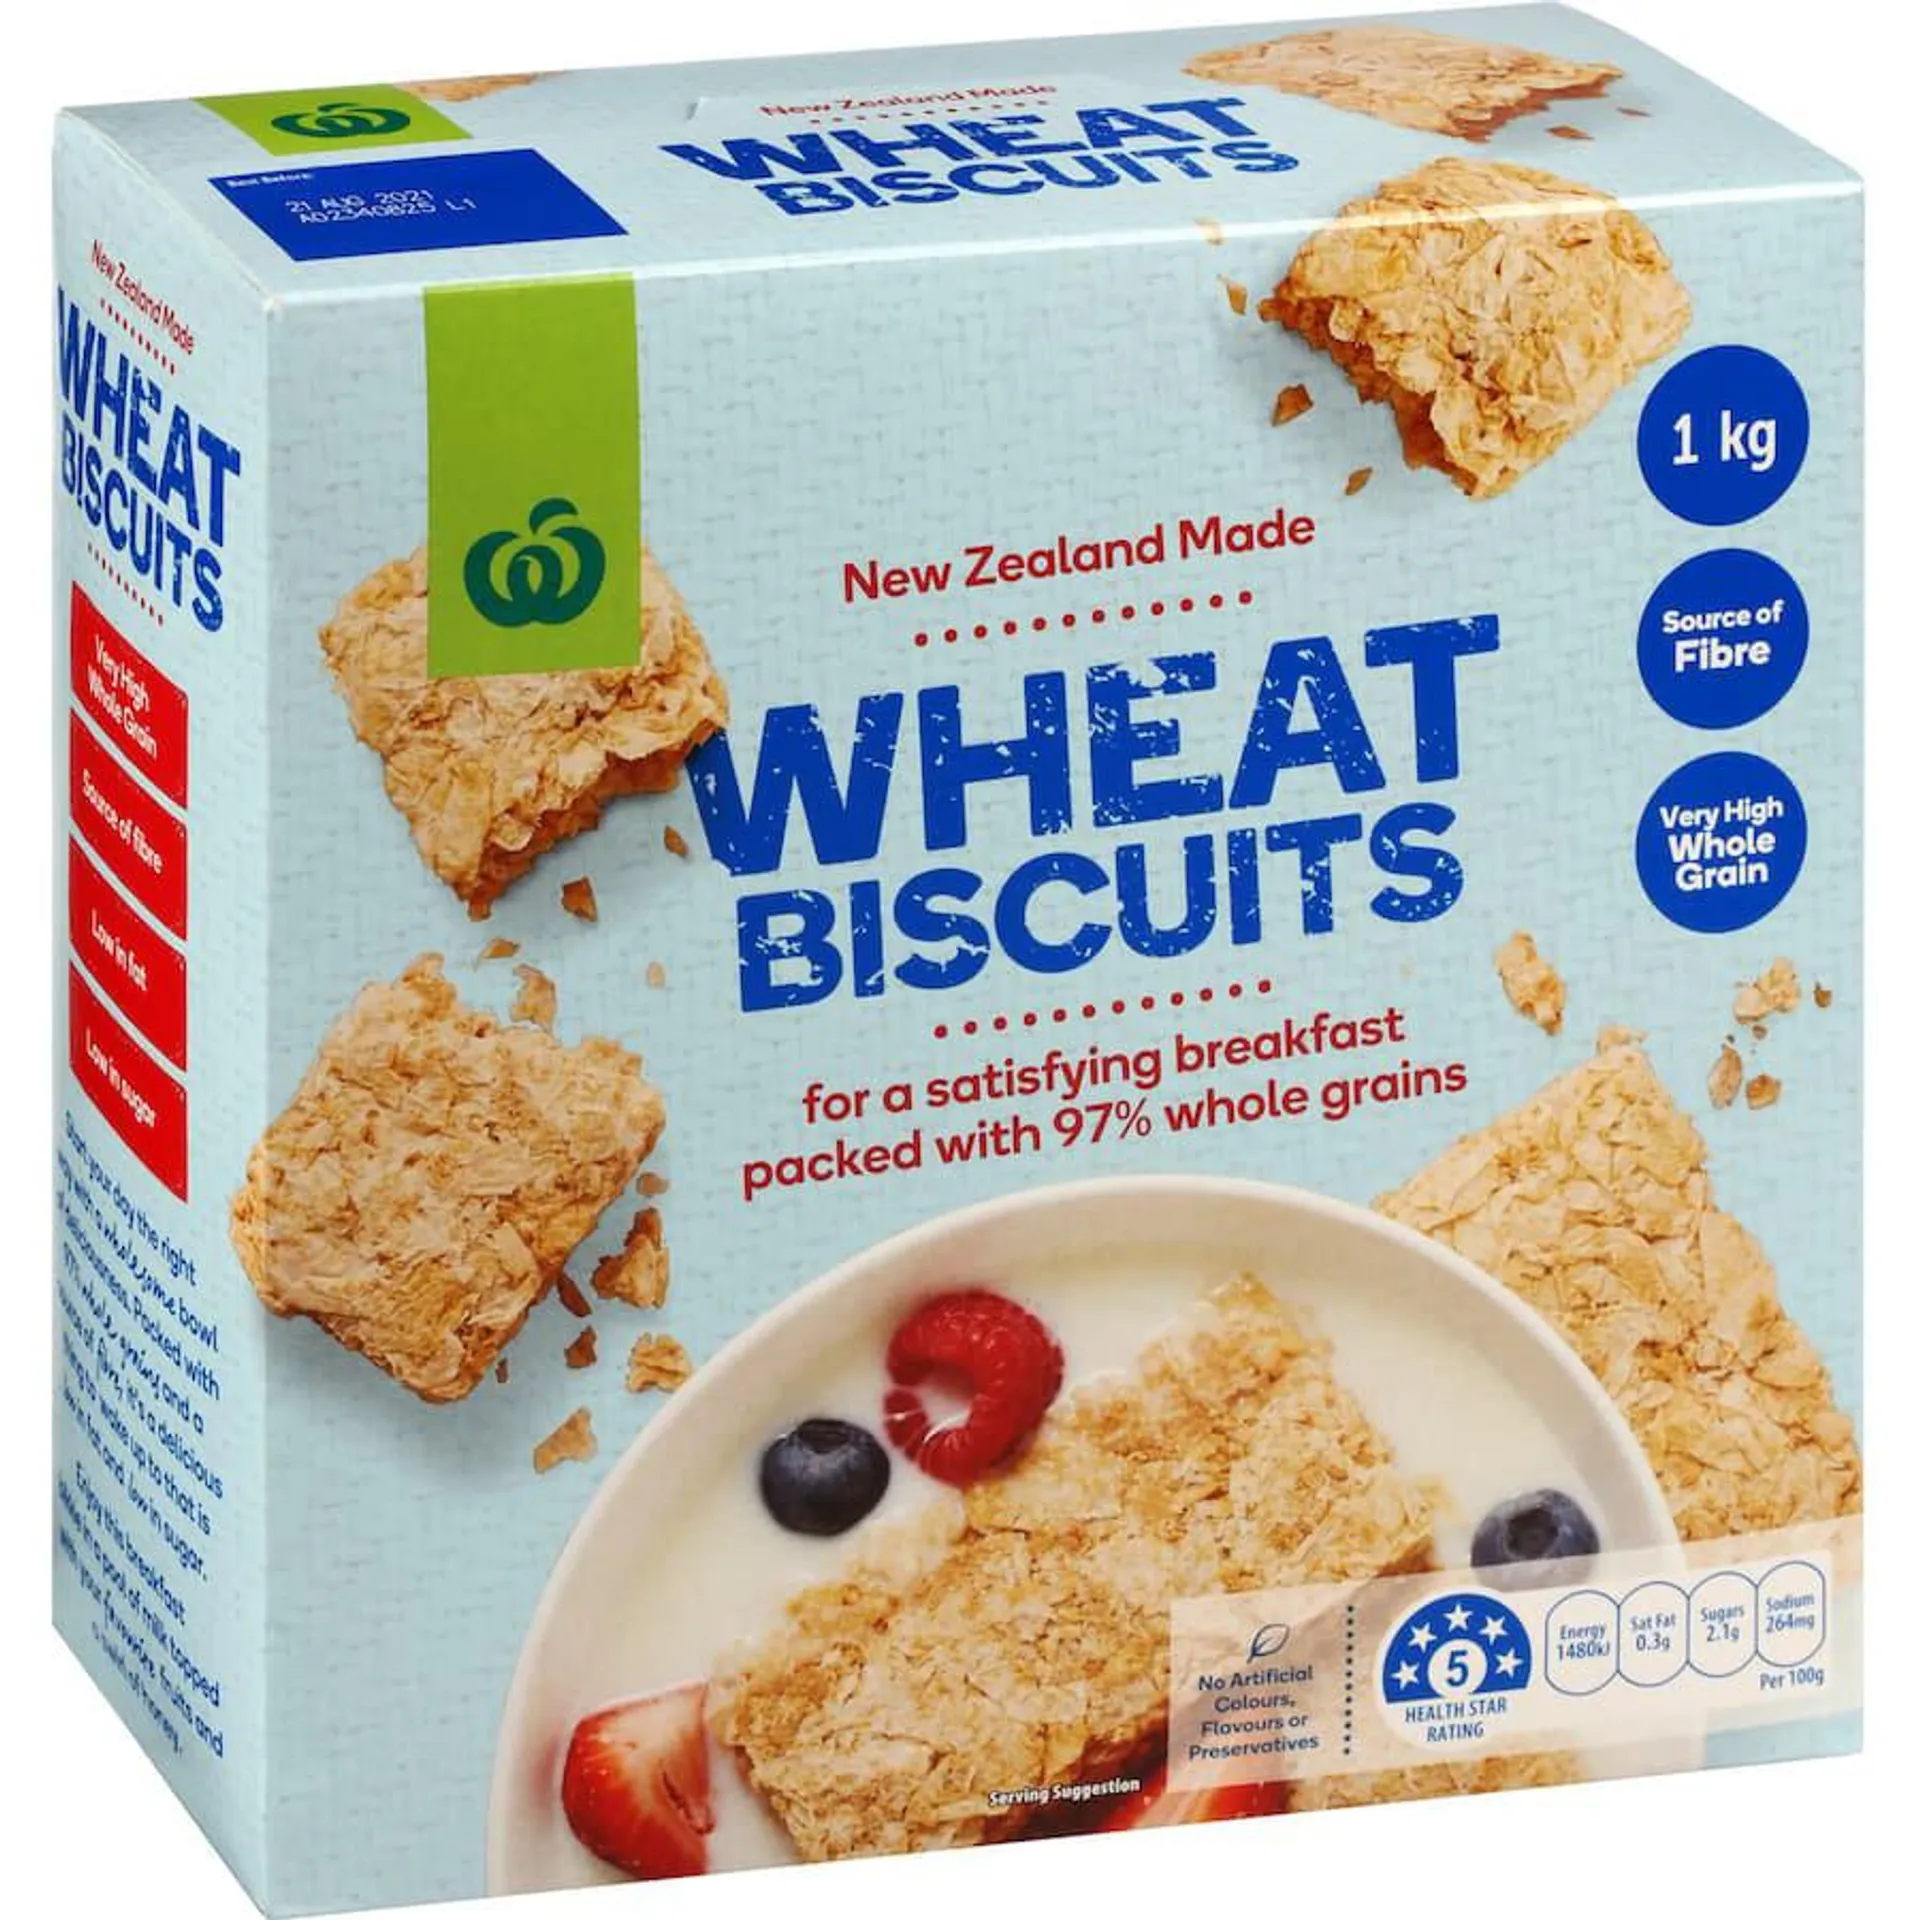 Woolworths Cereal Wheat Biscuits